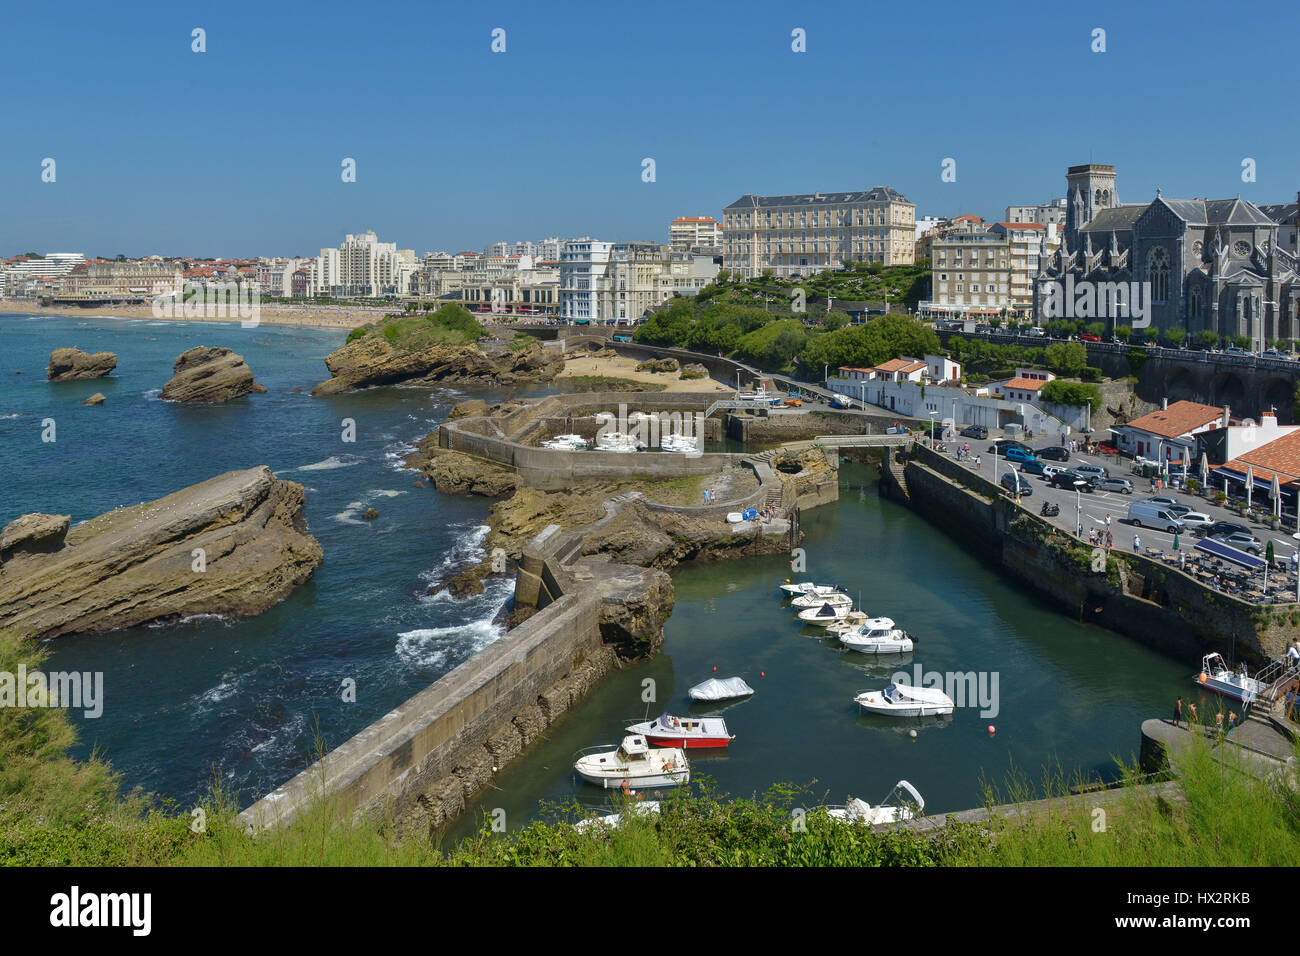 Biarritz (south-western France): the fishermen's port Stock Photo